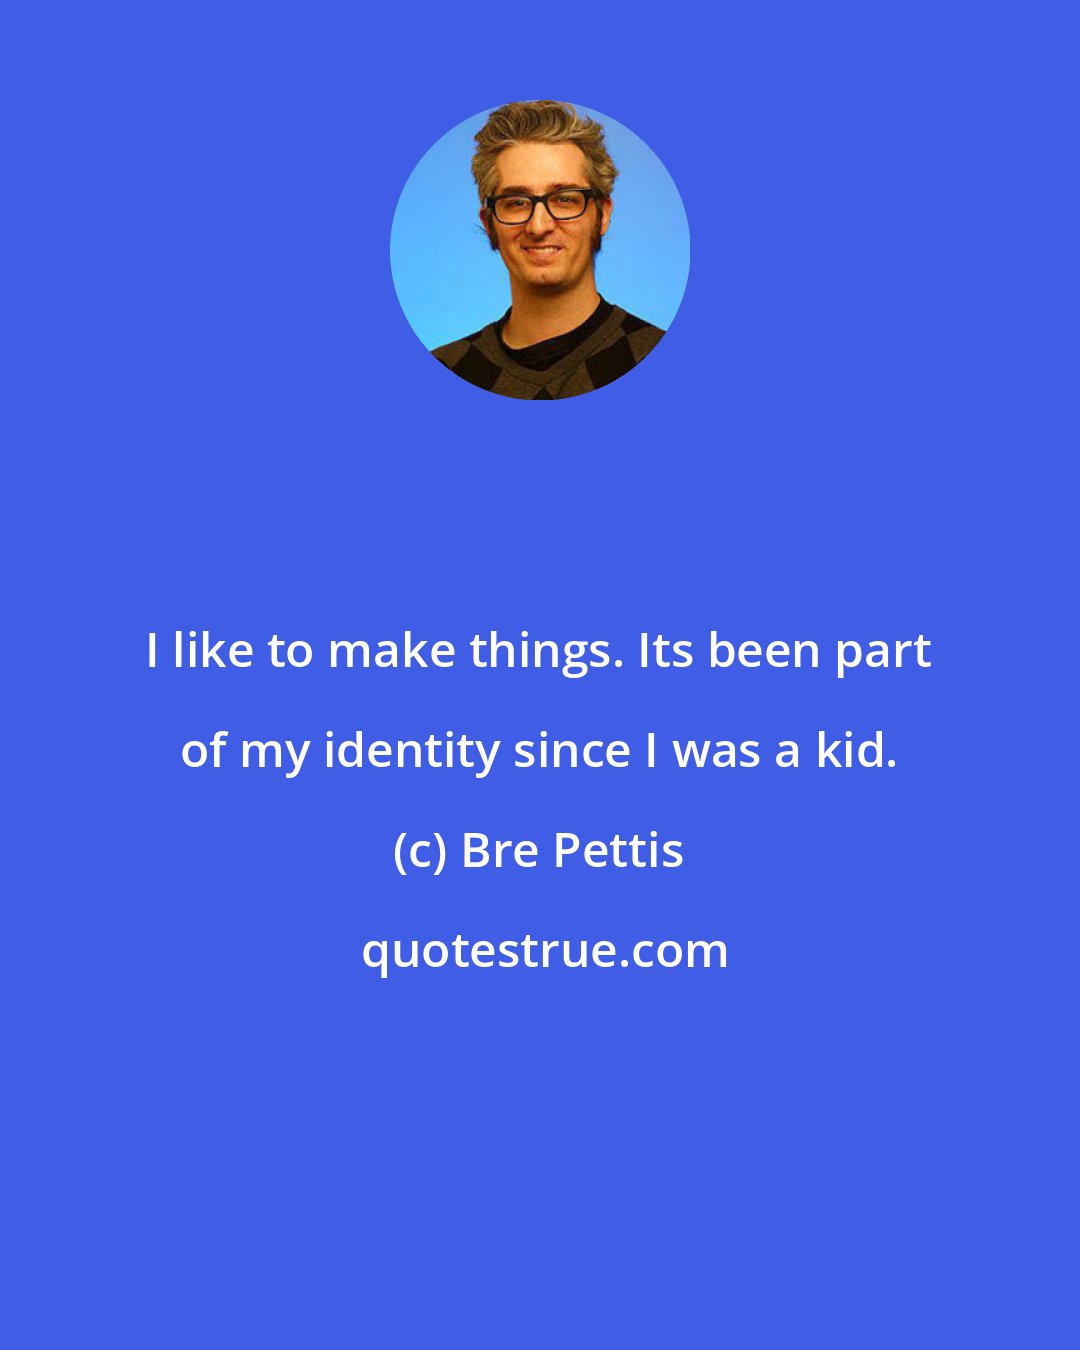 Bre Pettis: I like to make things. Its been part of my identity since I was a kid.